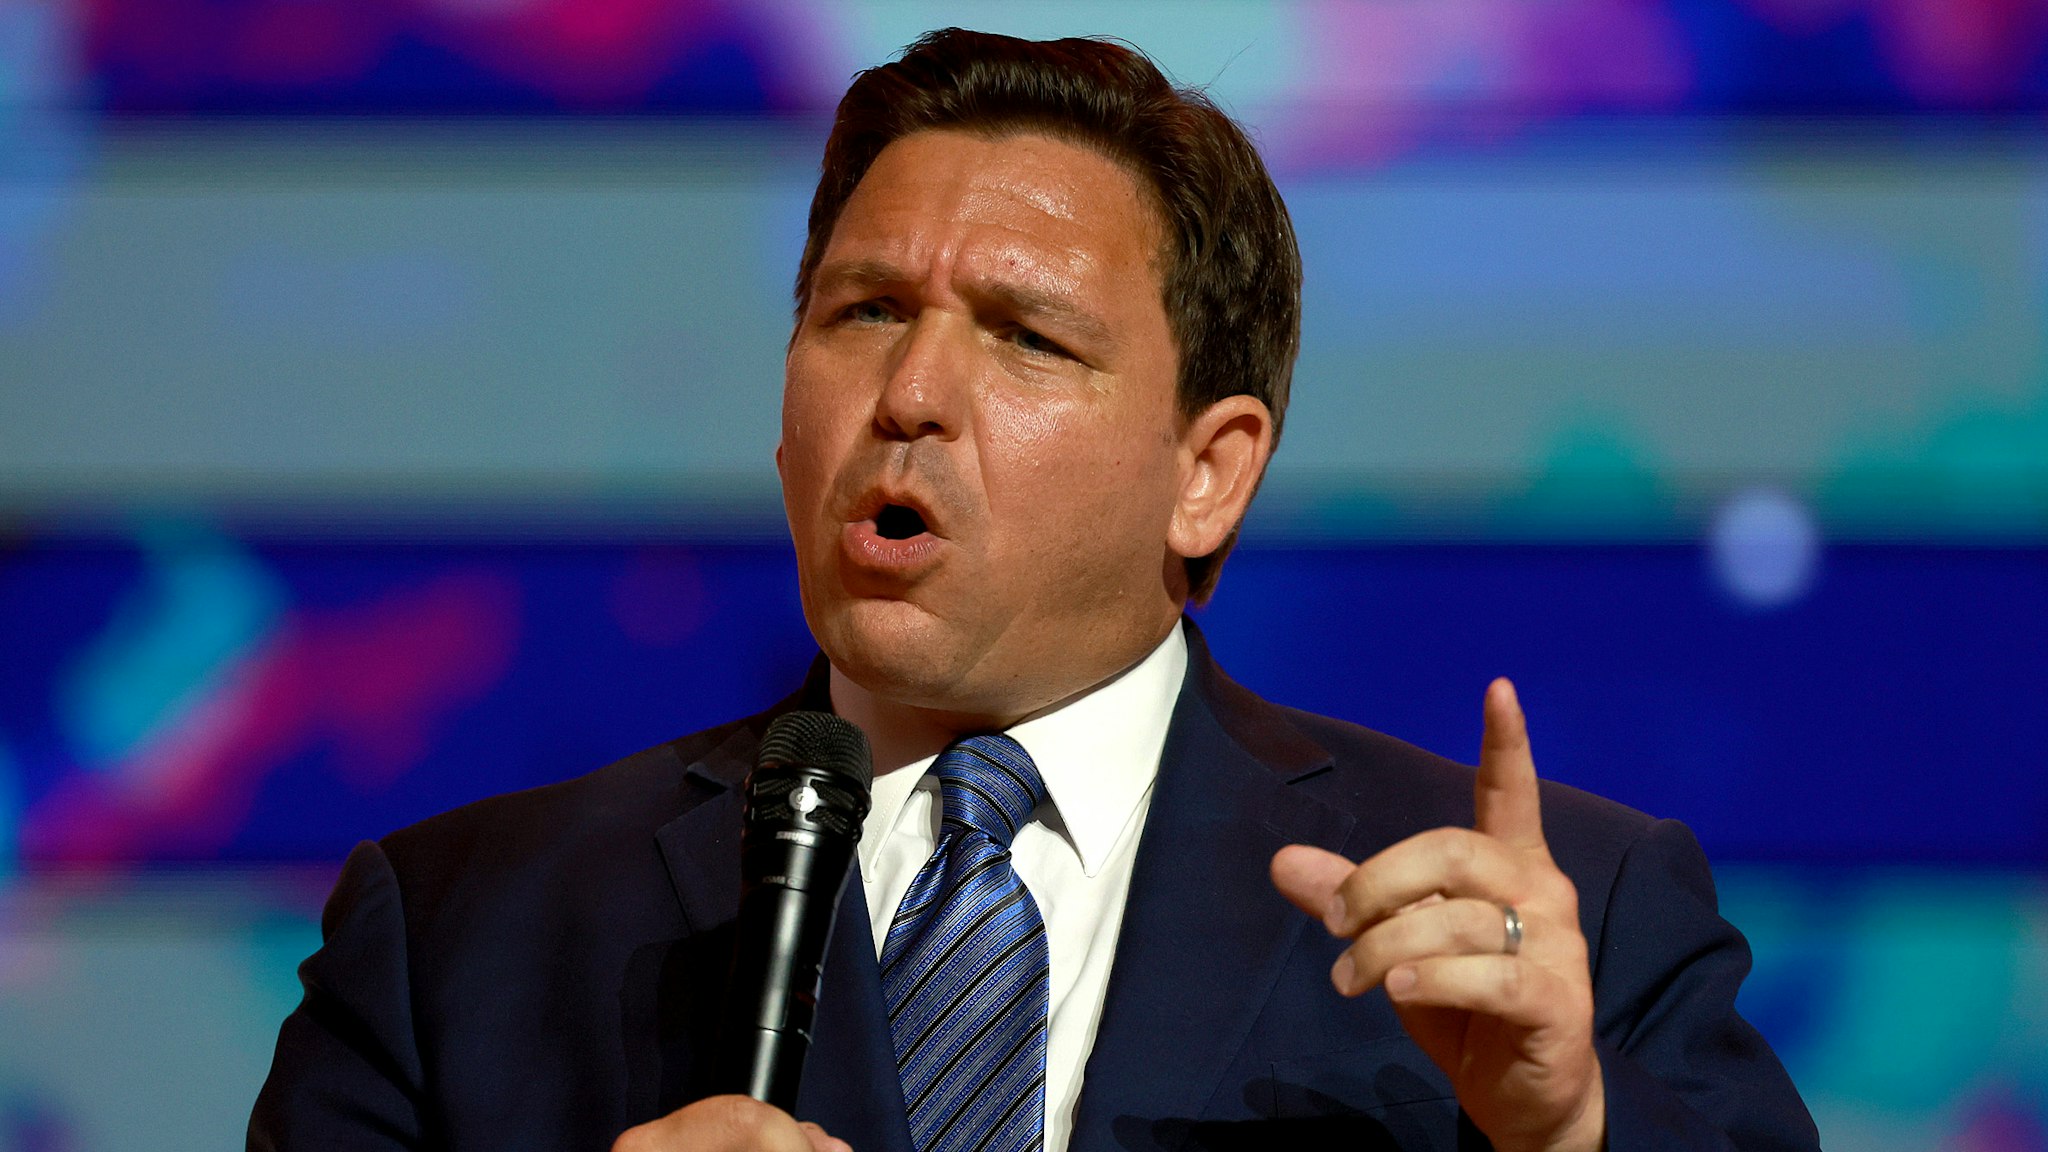 TAMPA, FLORIDA - JULY 22: Florida Gov. Ron DeSantis speaks during the Turning Point USA Student Action Summit held at the Tampa Convention Center on July 22, 2022 in Tampa, Florida. The event features student activism and leadership training, and a chance to participate in a series of networking events with political leaders.